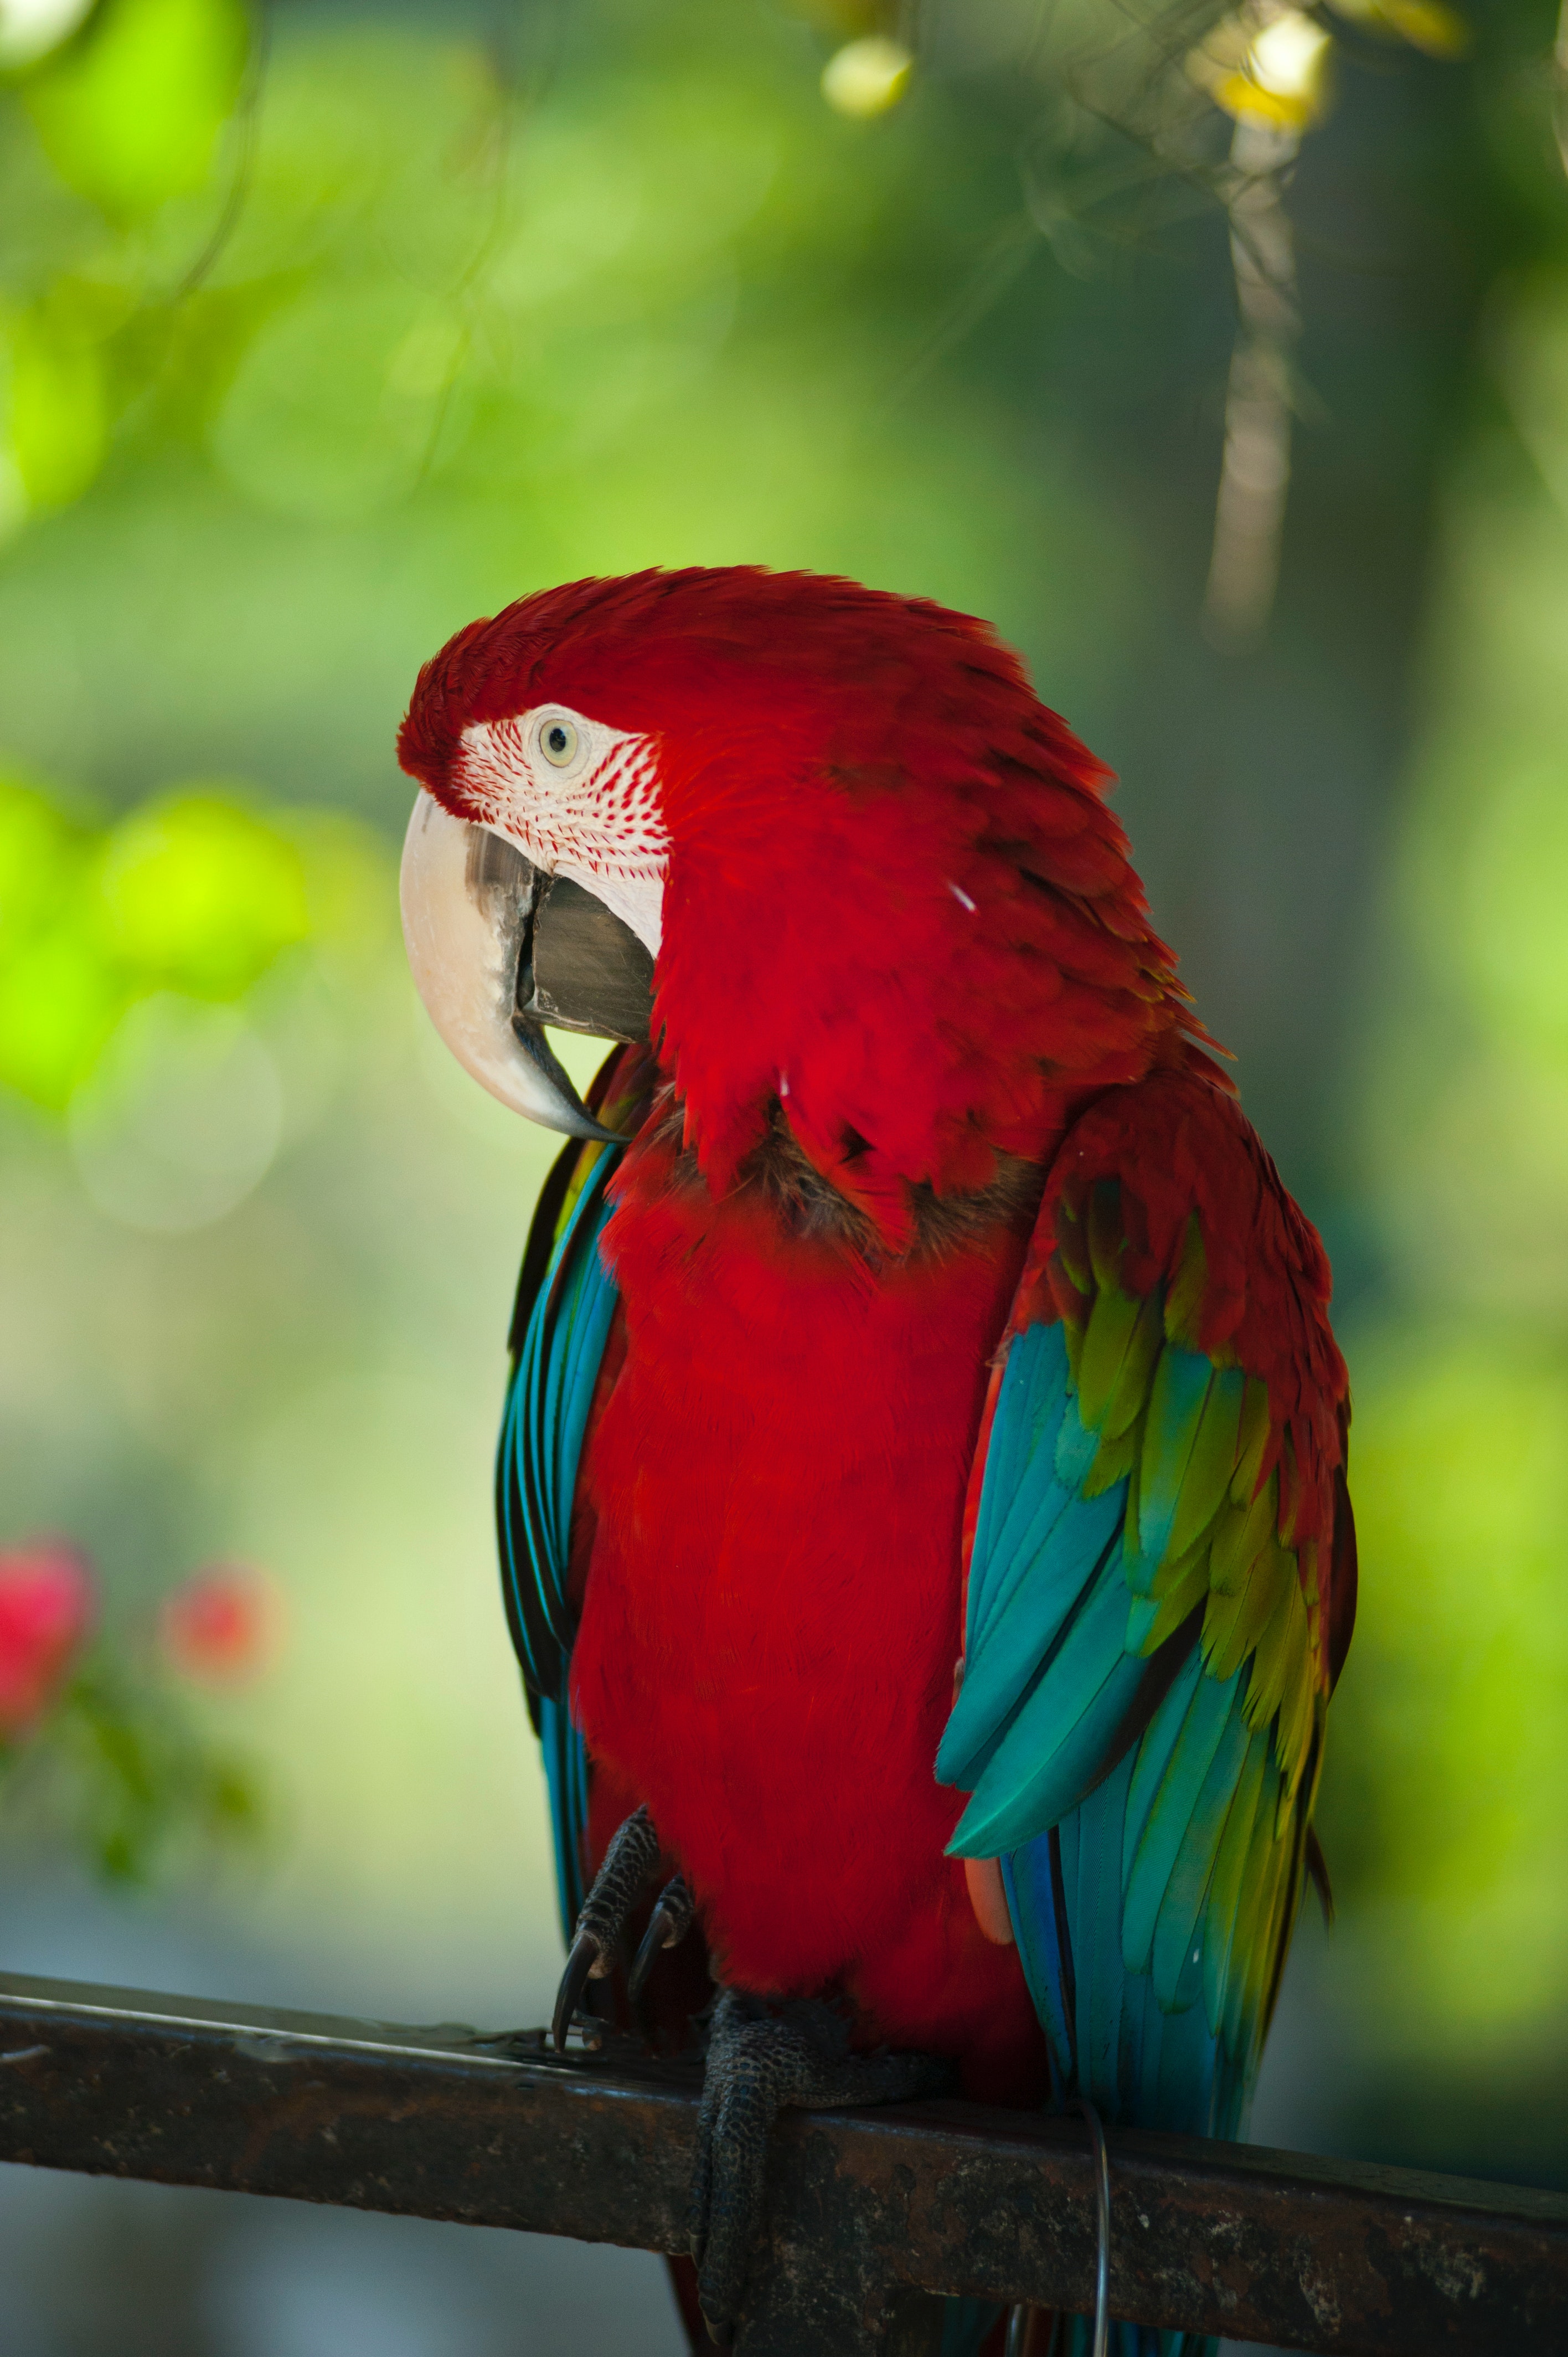 Best Free Parrots & Image · 100% Royalty Free HD Downloads